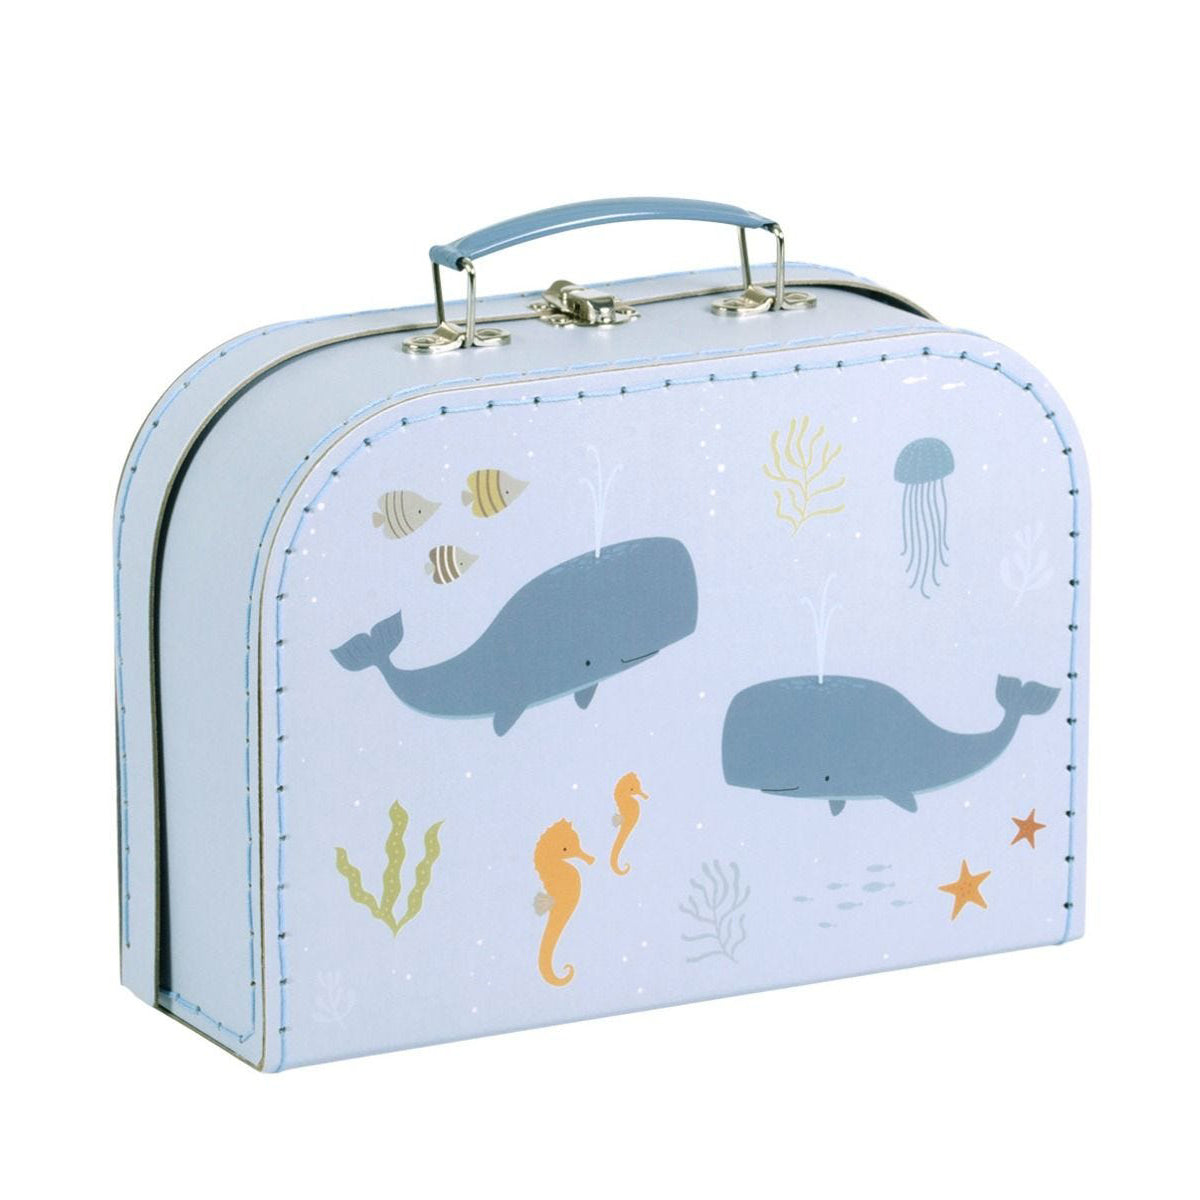 a-little-lovely-company-suitcase-set-ocean- (5)